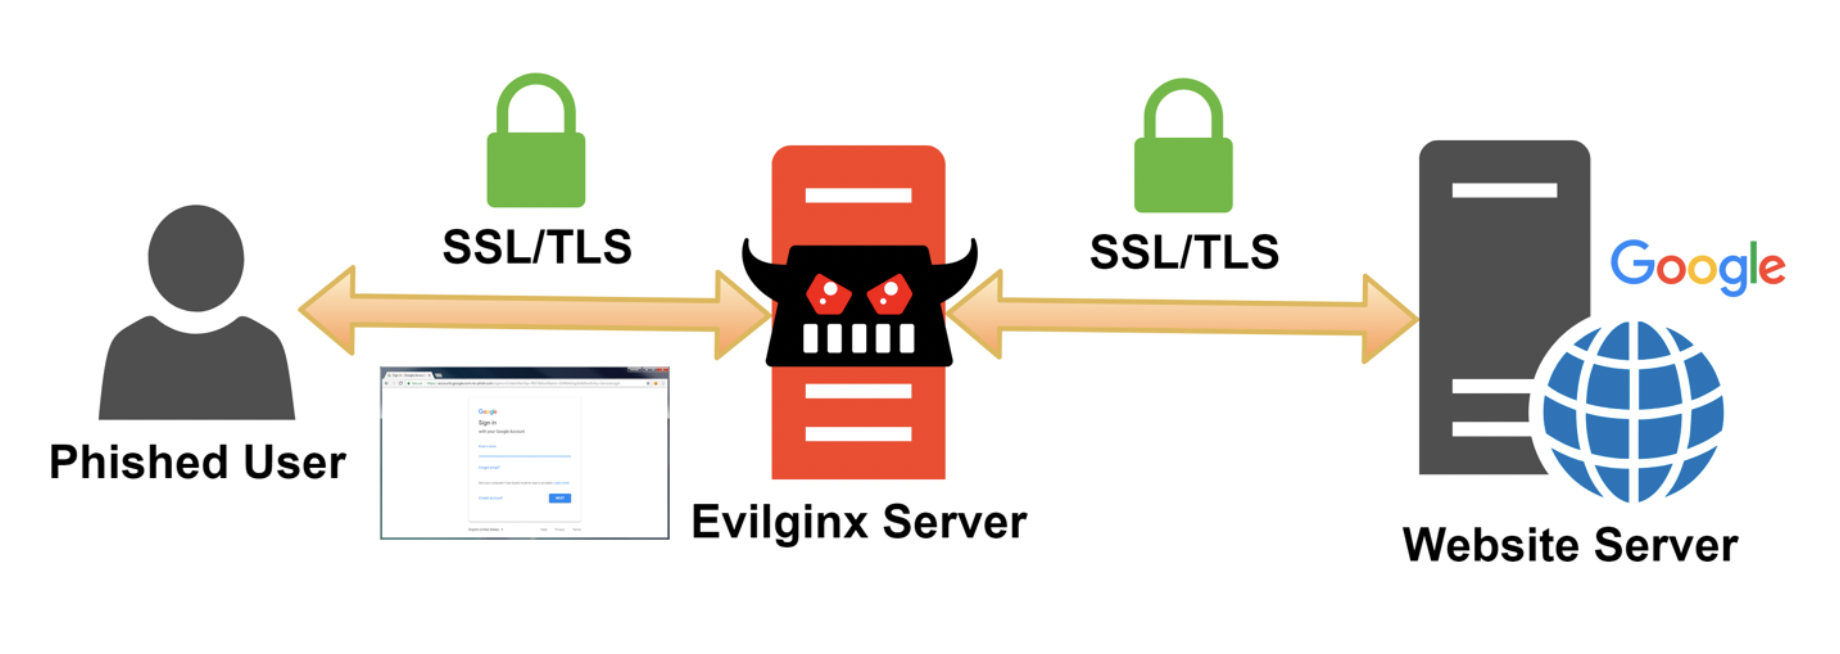 man-in-the-middle (MitM) attack using a tool such as Evilginx